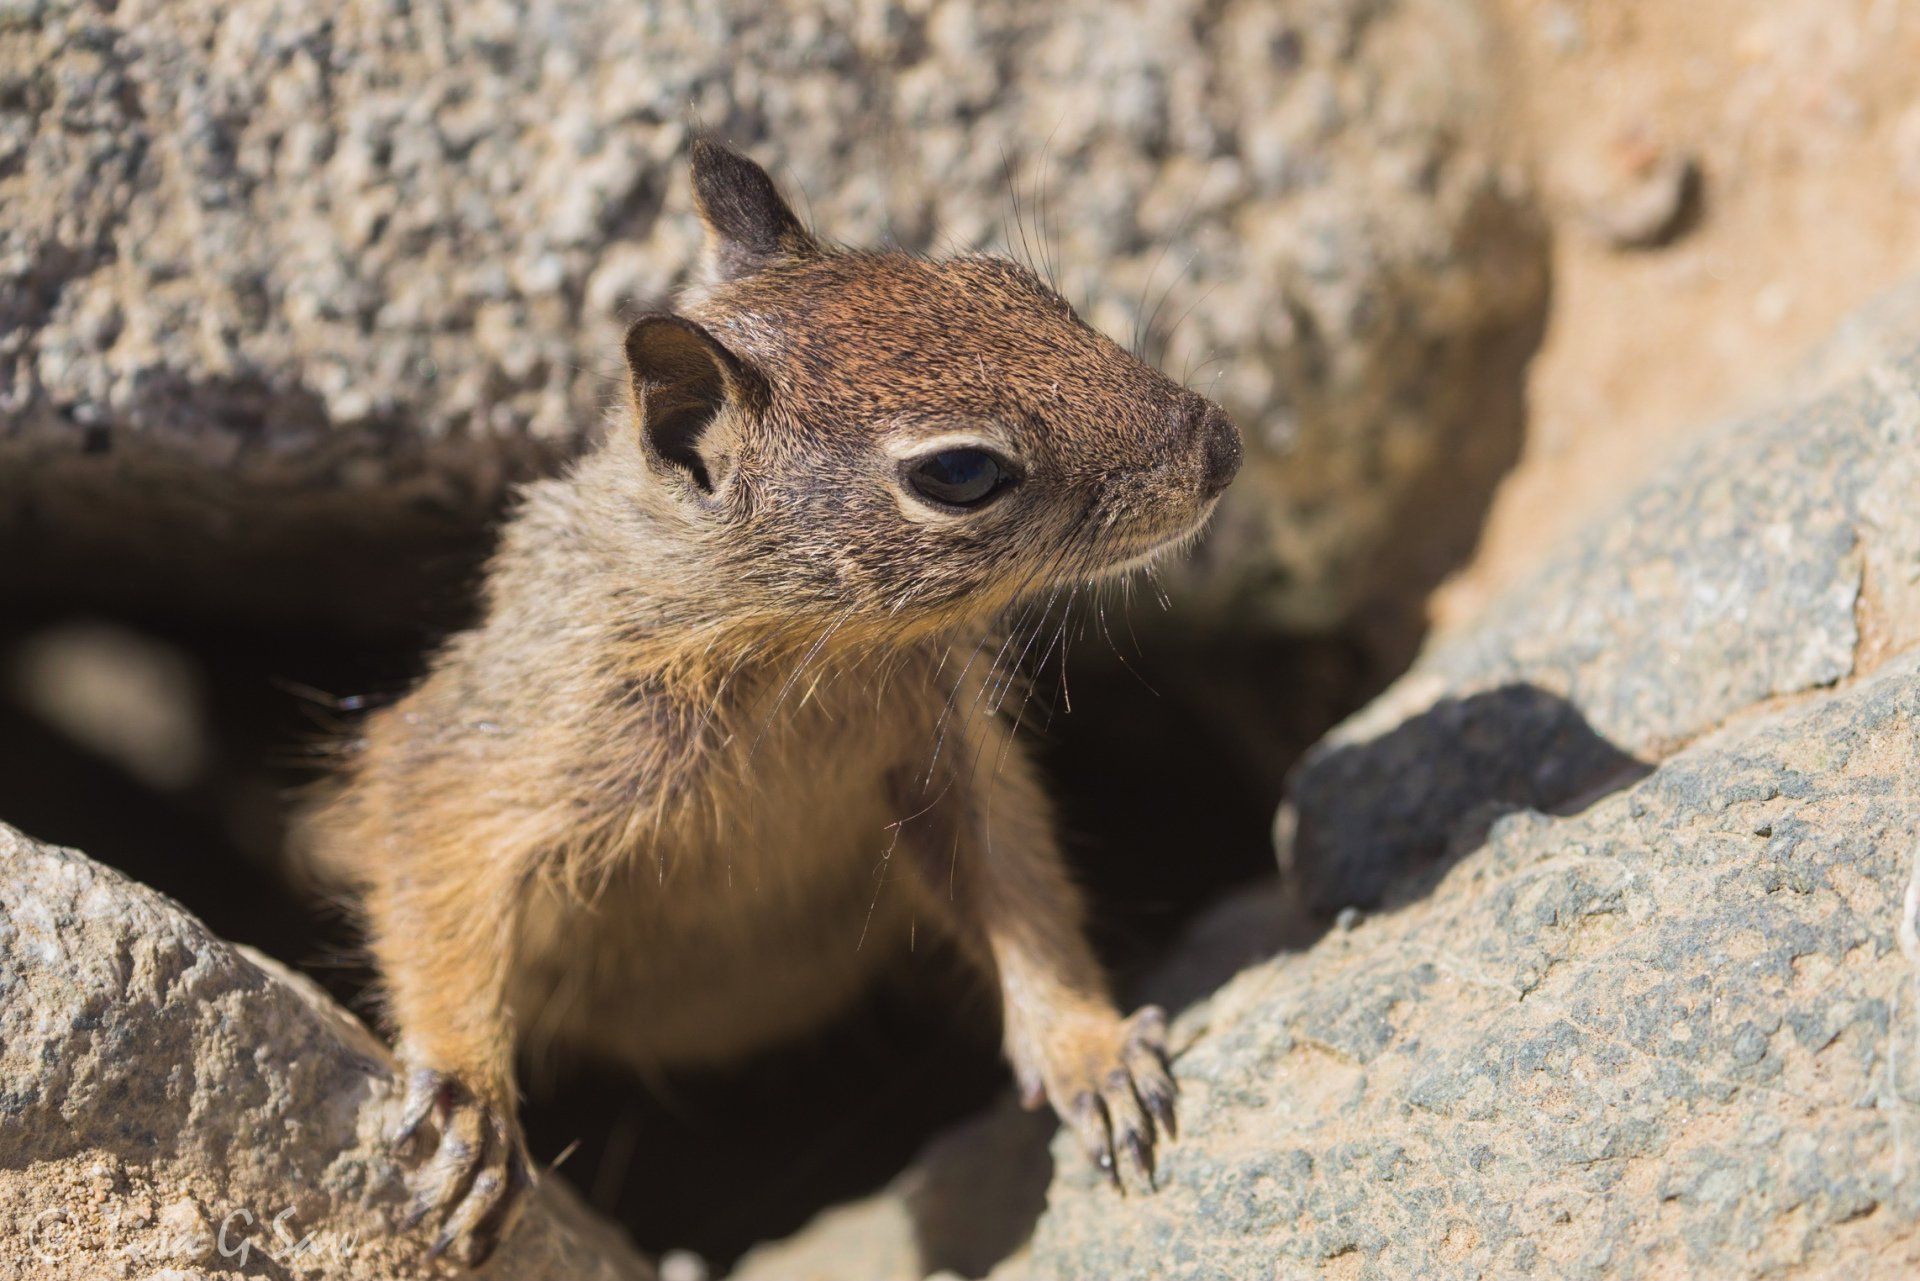 Young ground squirrel emerging from hole in rocks, California